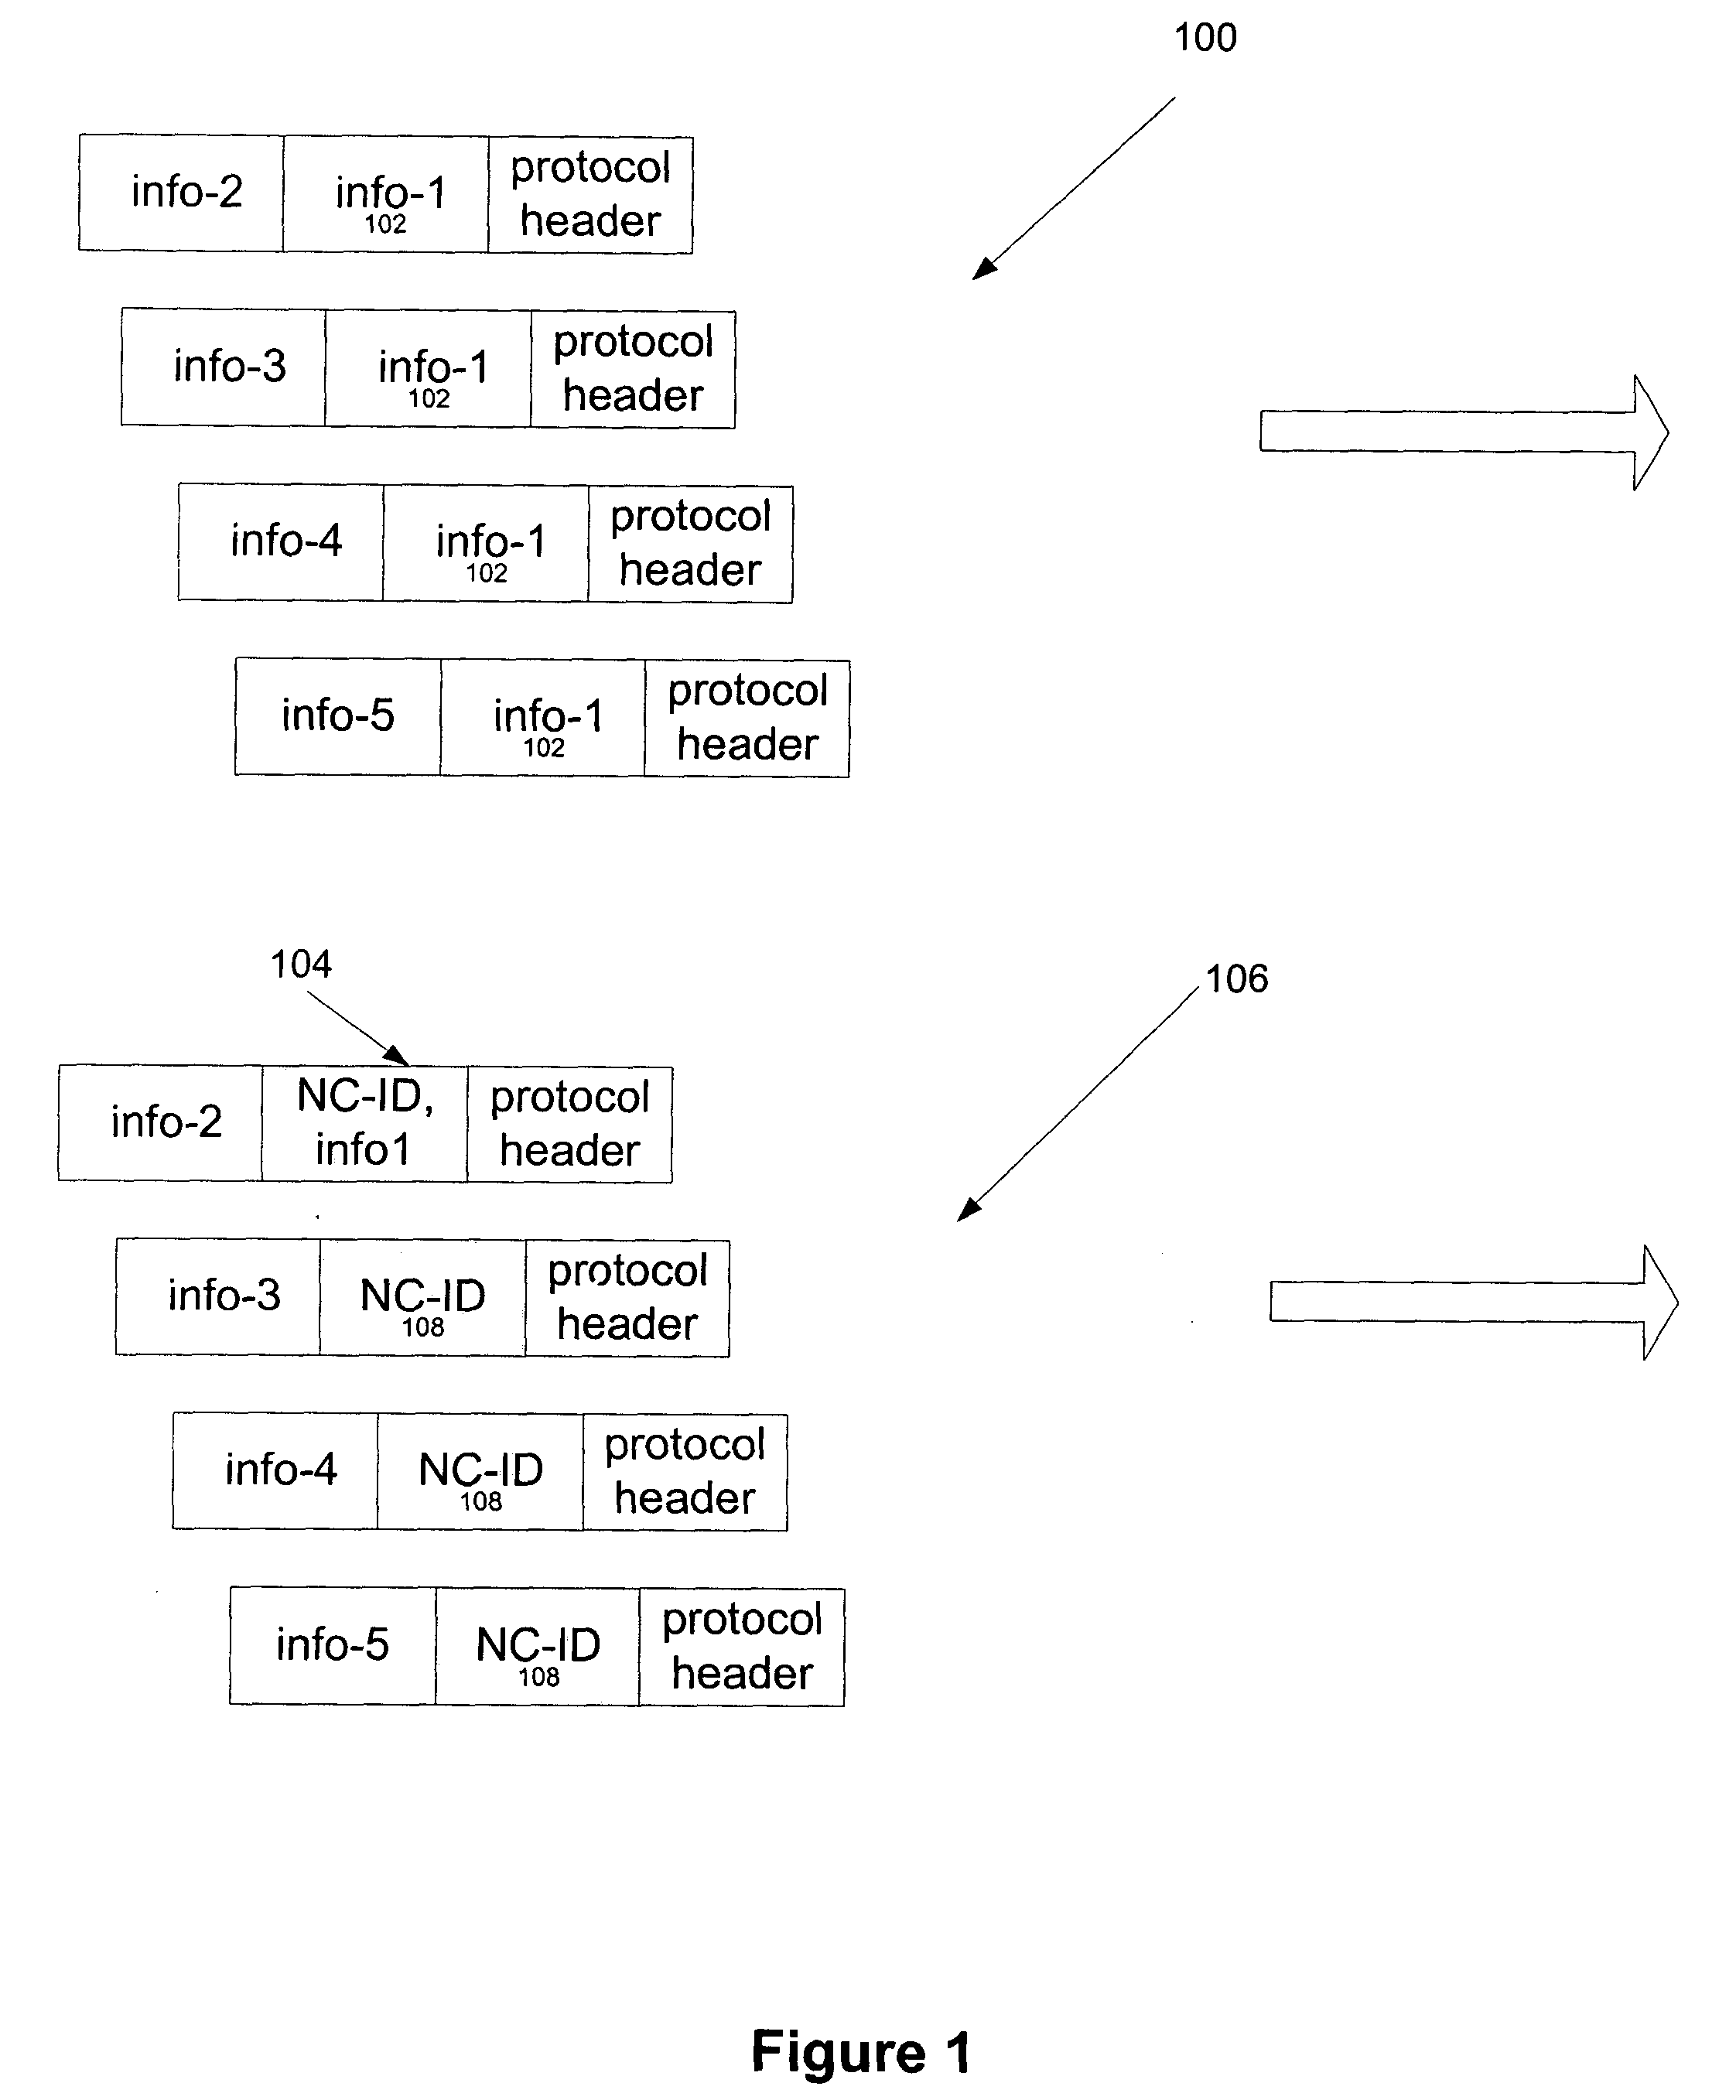 Nested components for network protocols